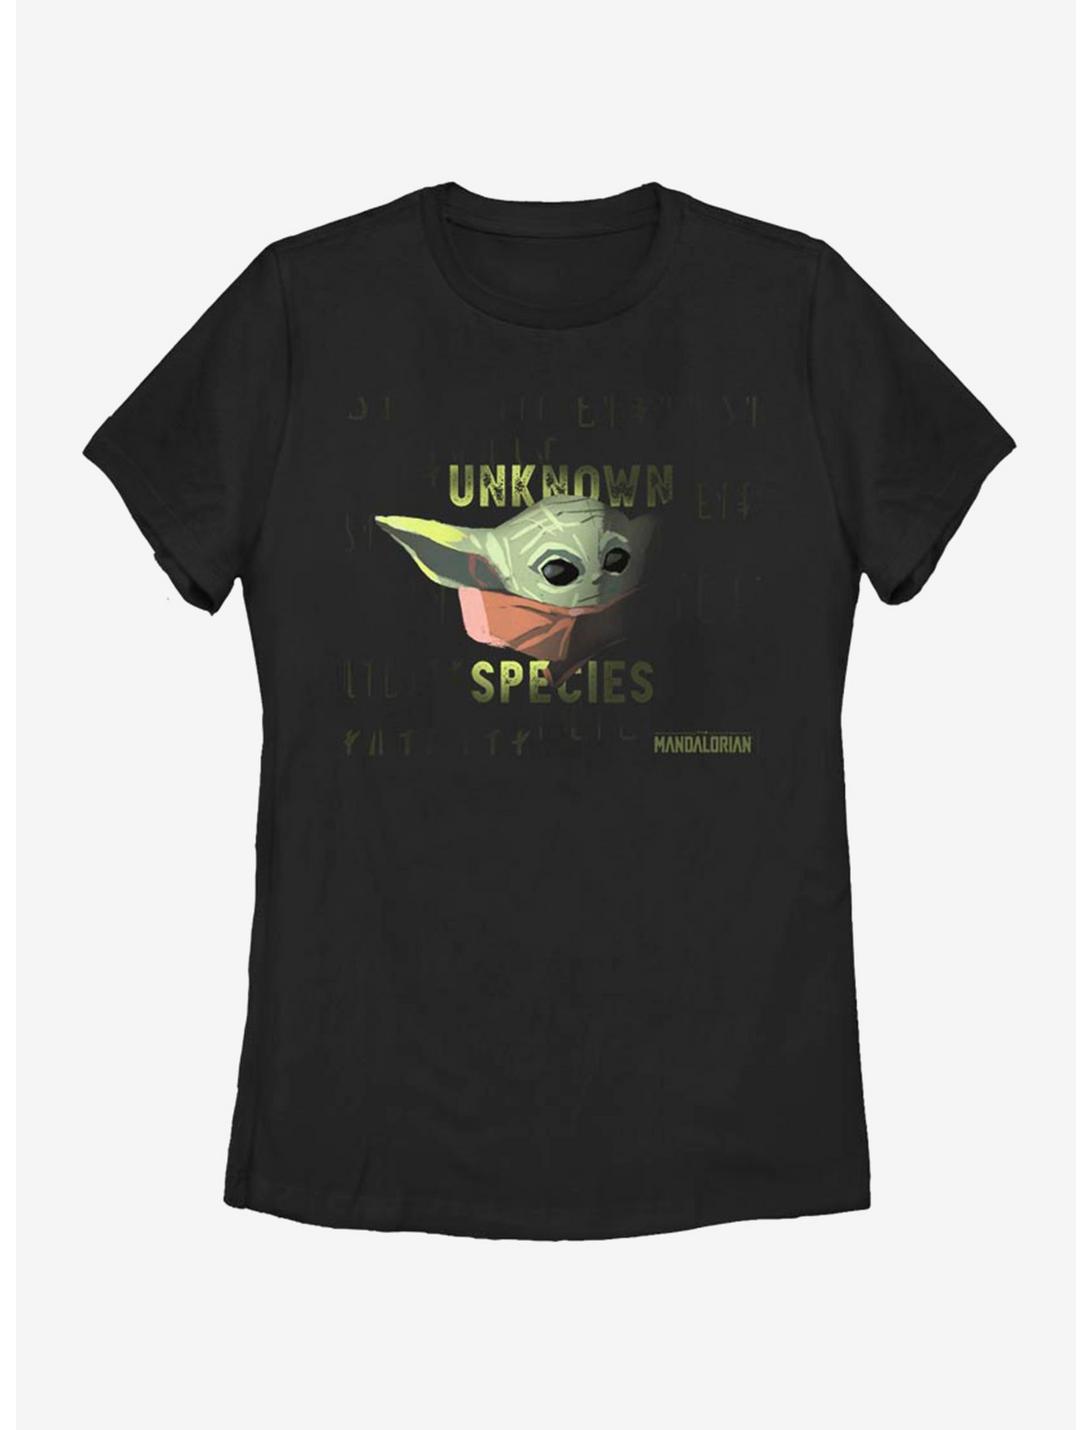 Star Wars The Mandalorian The Child Unknown Species Womens T-Shirt, BLACK, hi-res